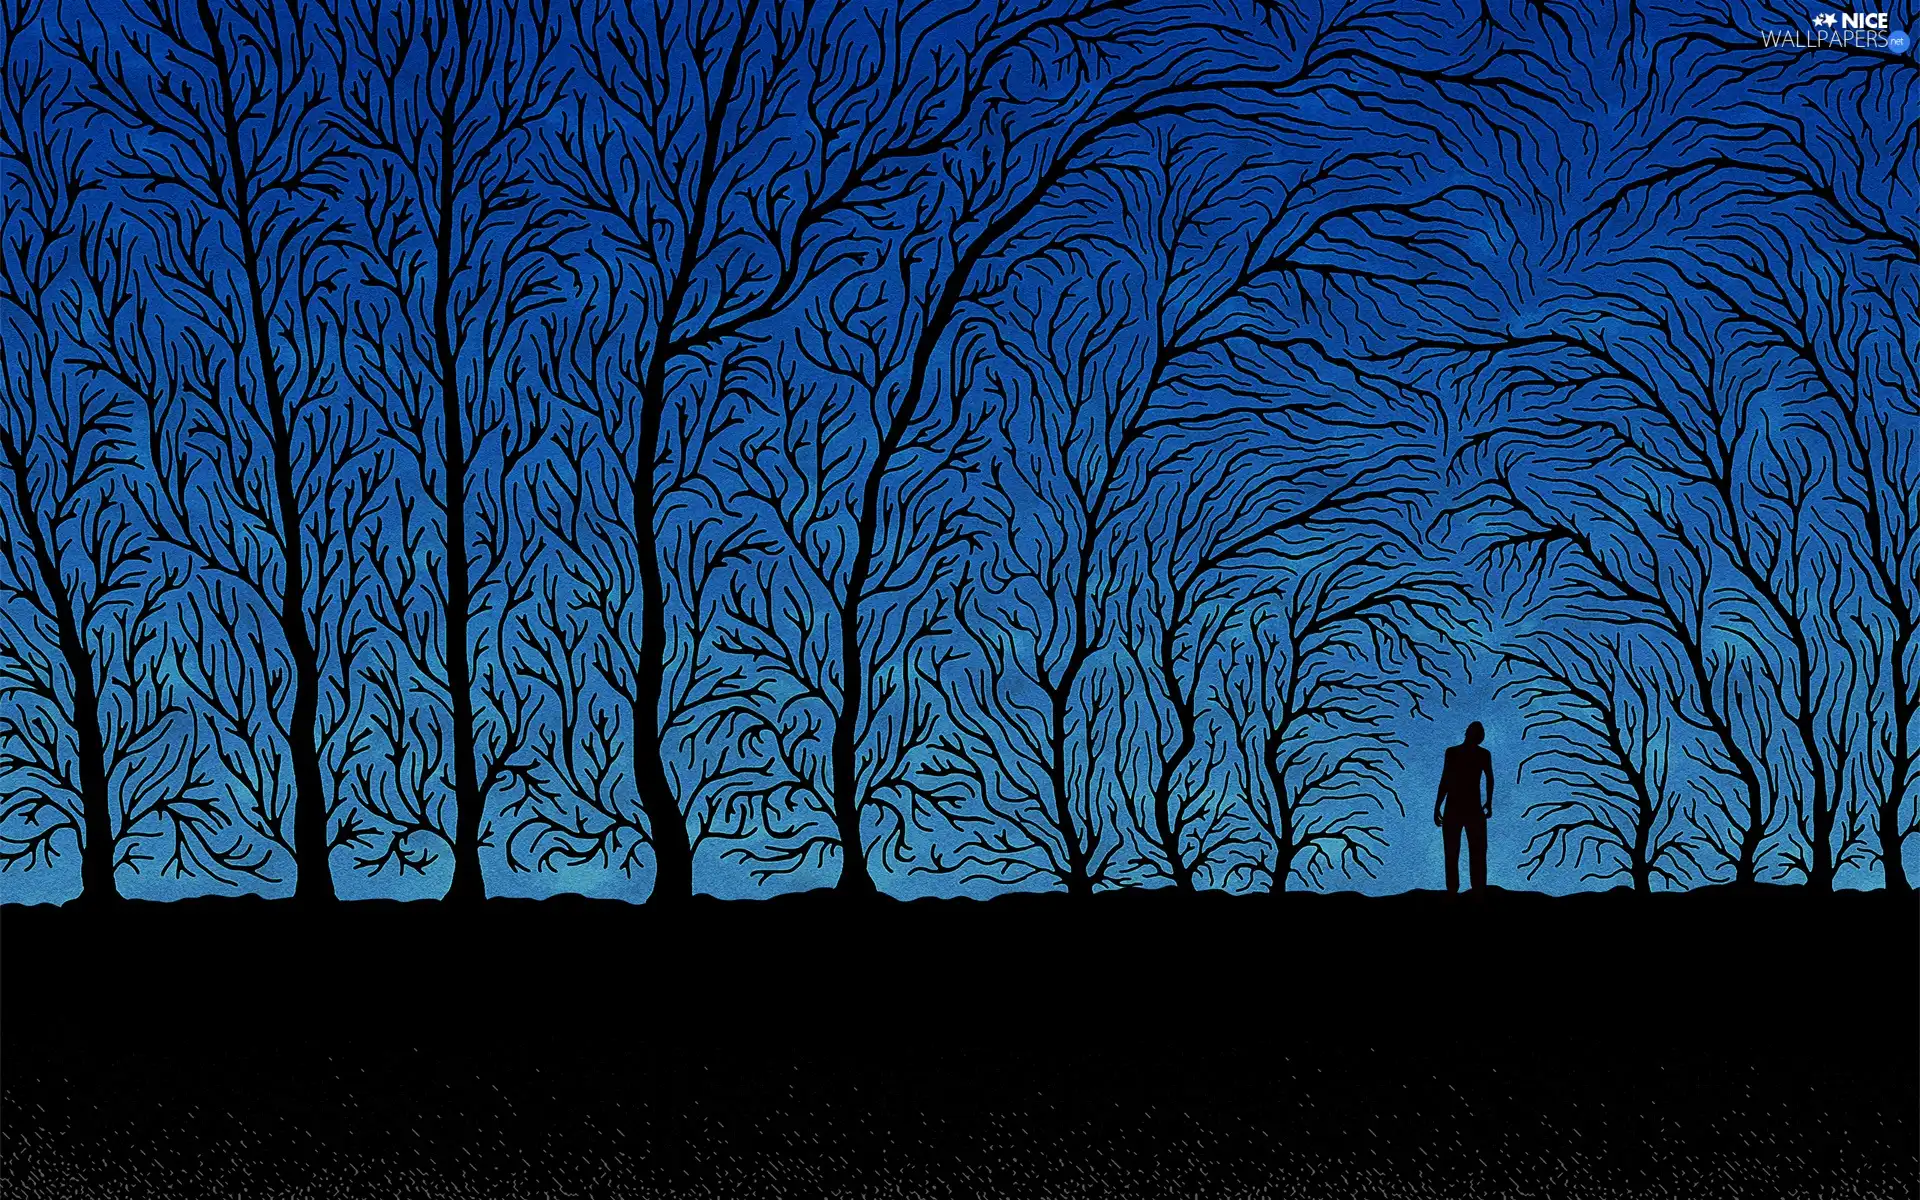 Human, graphics, trees, viewes, Night